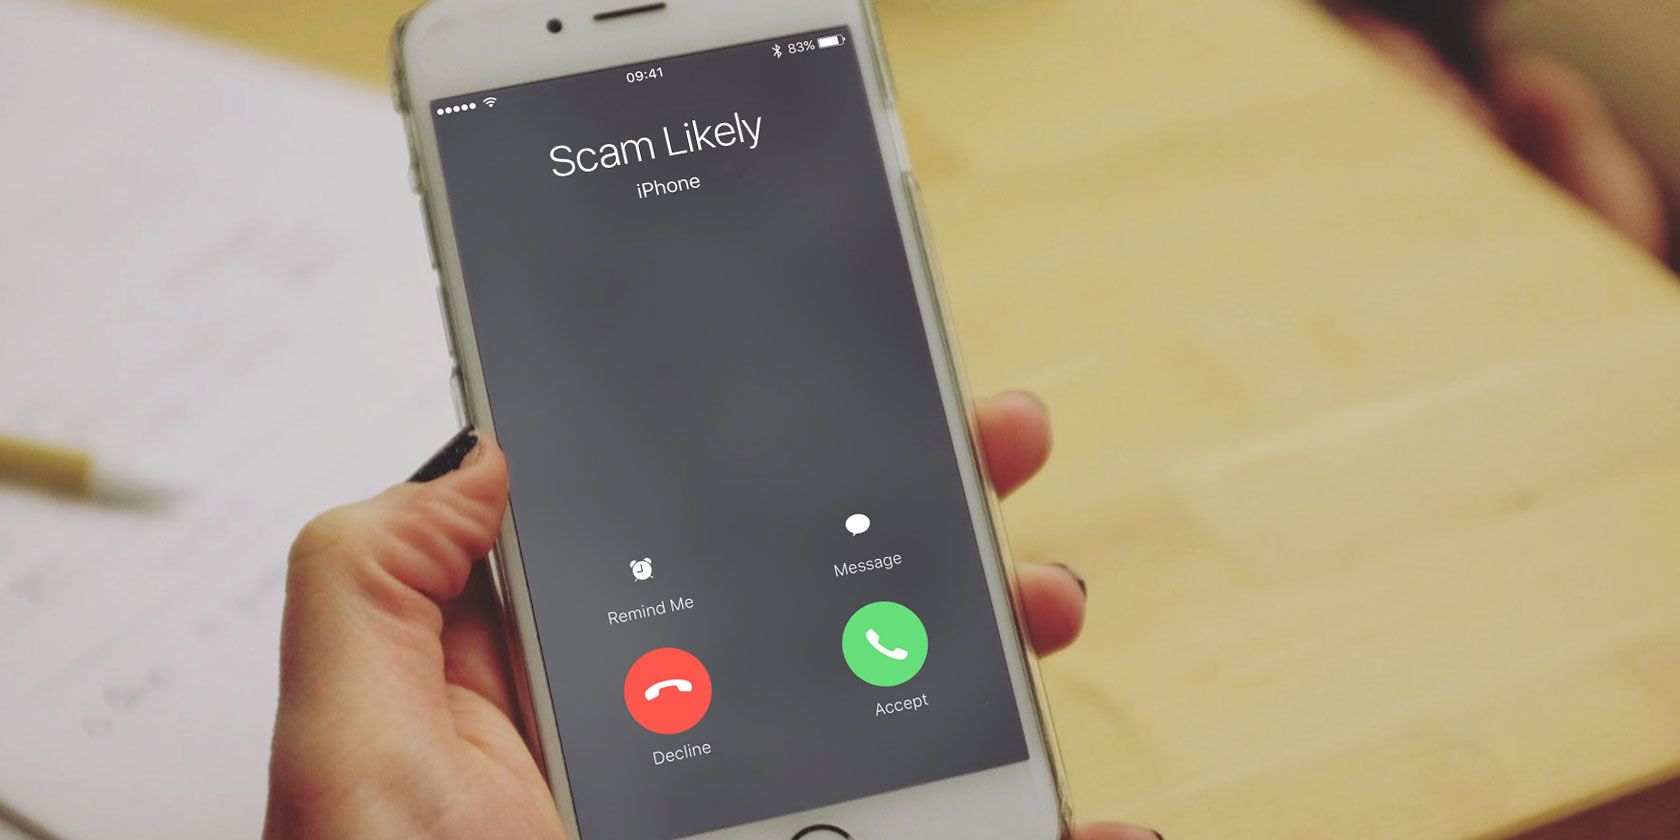 Is "Scam Likely" Calling You? Here's How to Block Them